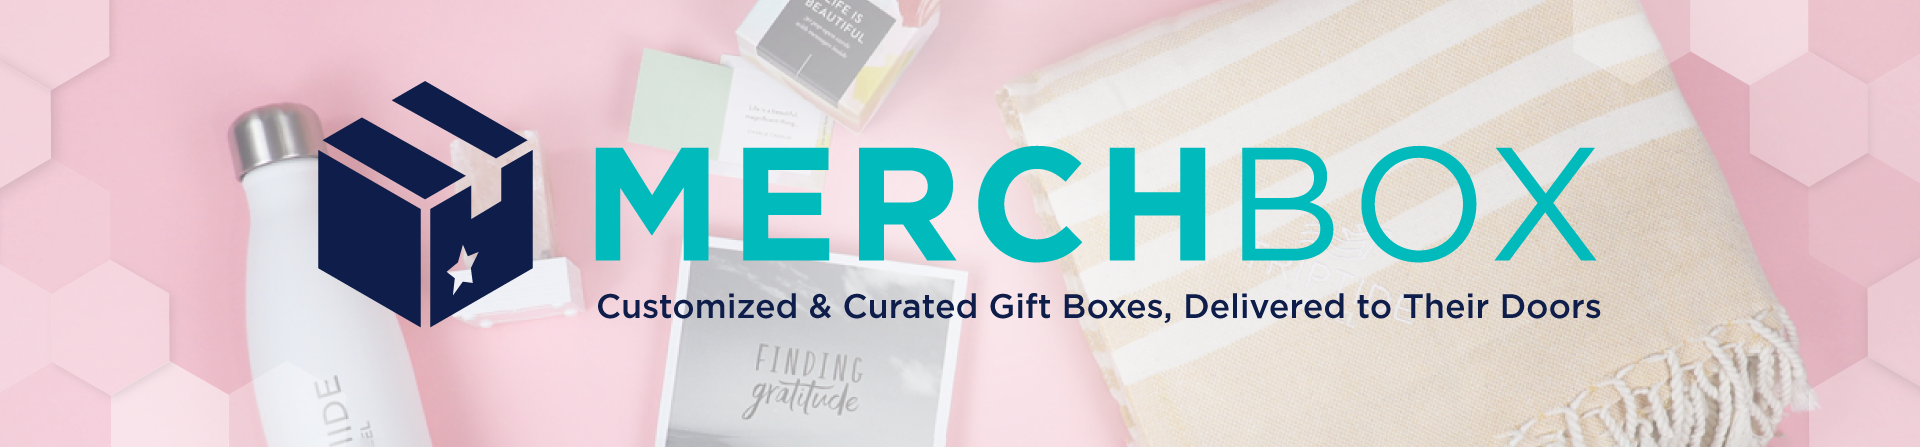 MerchBoxes are pre-bundled corporate gift sets featuring your company logo for amazing corporate gifts